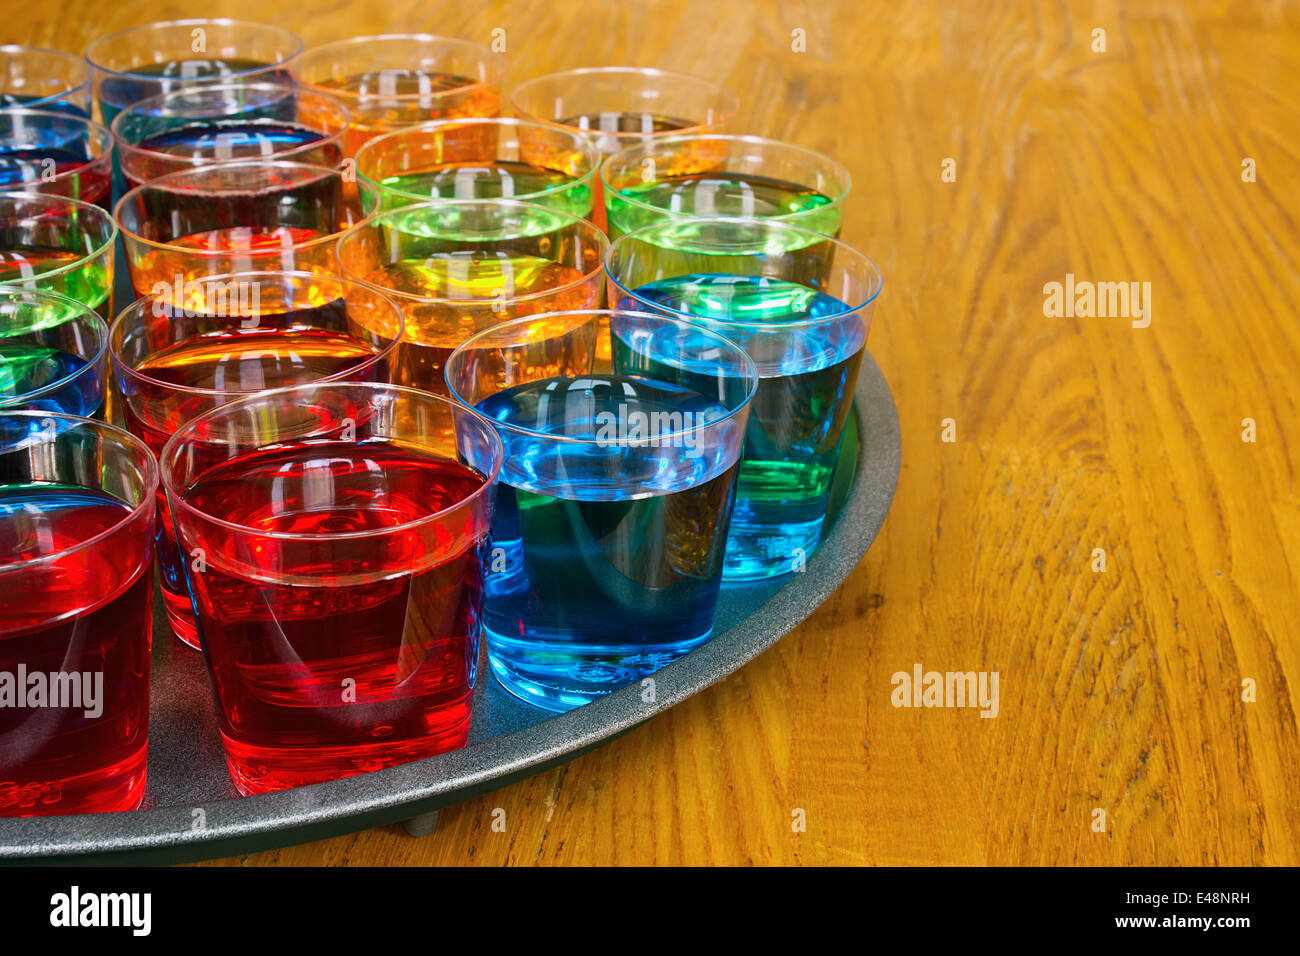 Drinks promotion with various shots on a tray to test as samplers or tasters for merchandising in the drinks industry. Stock Photo